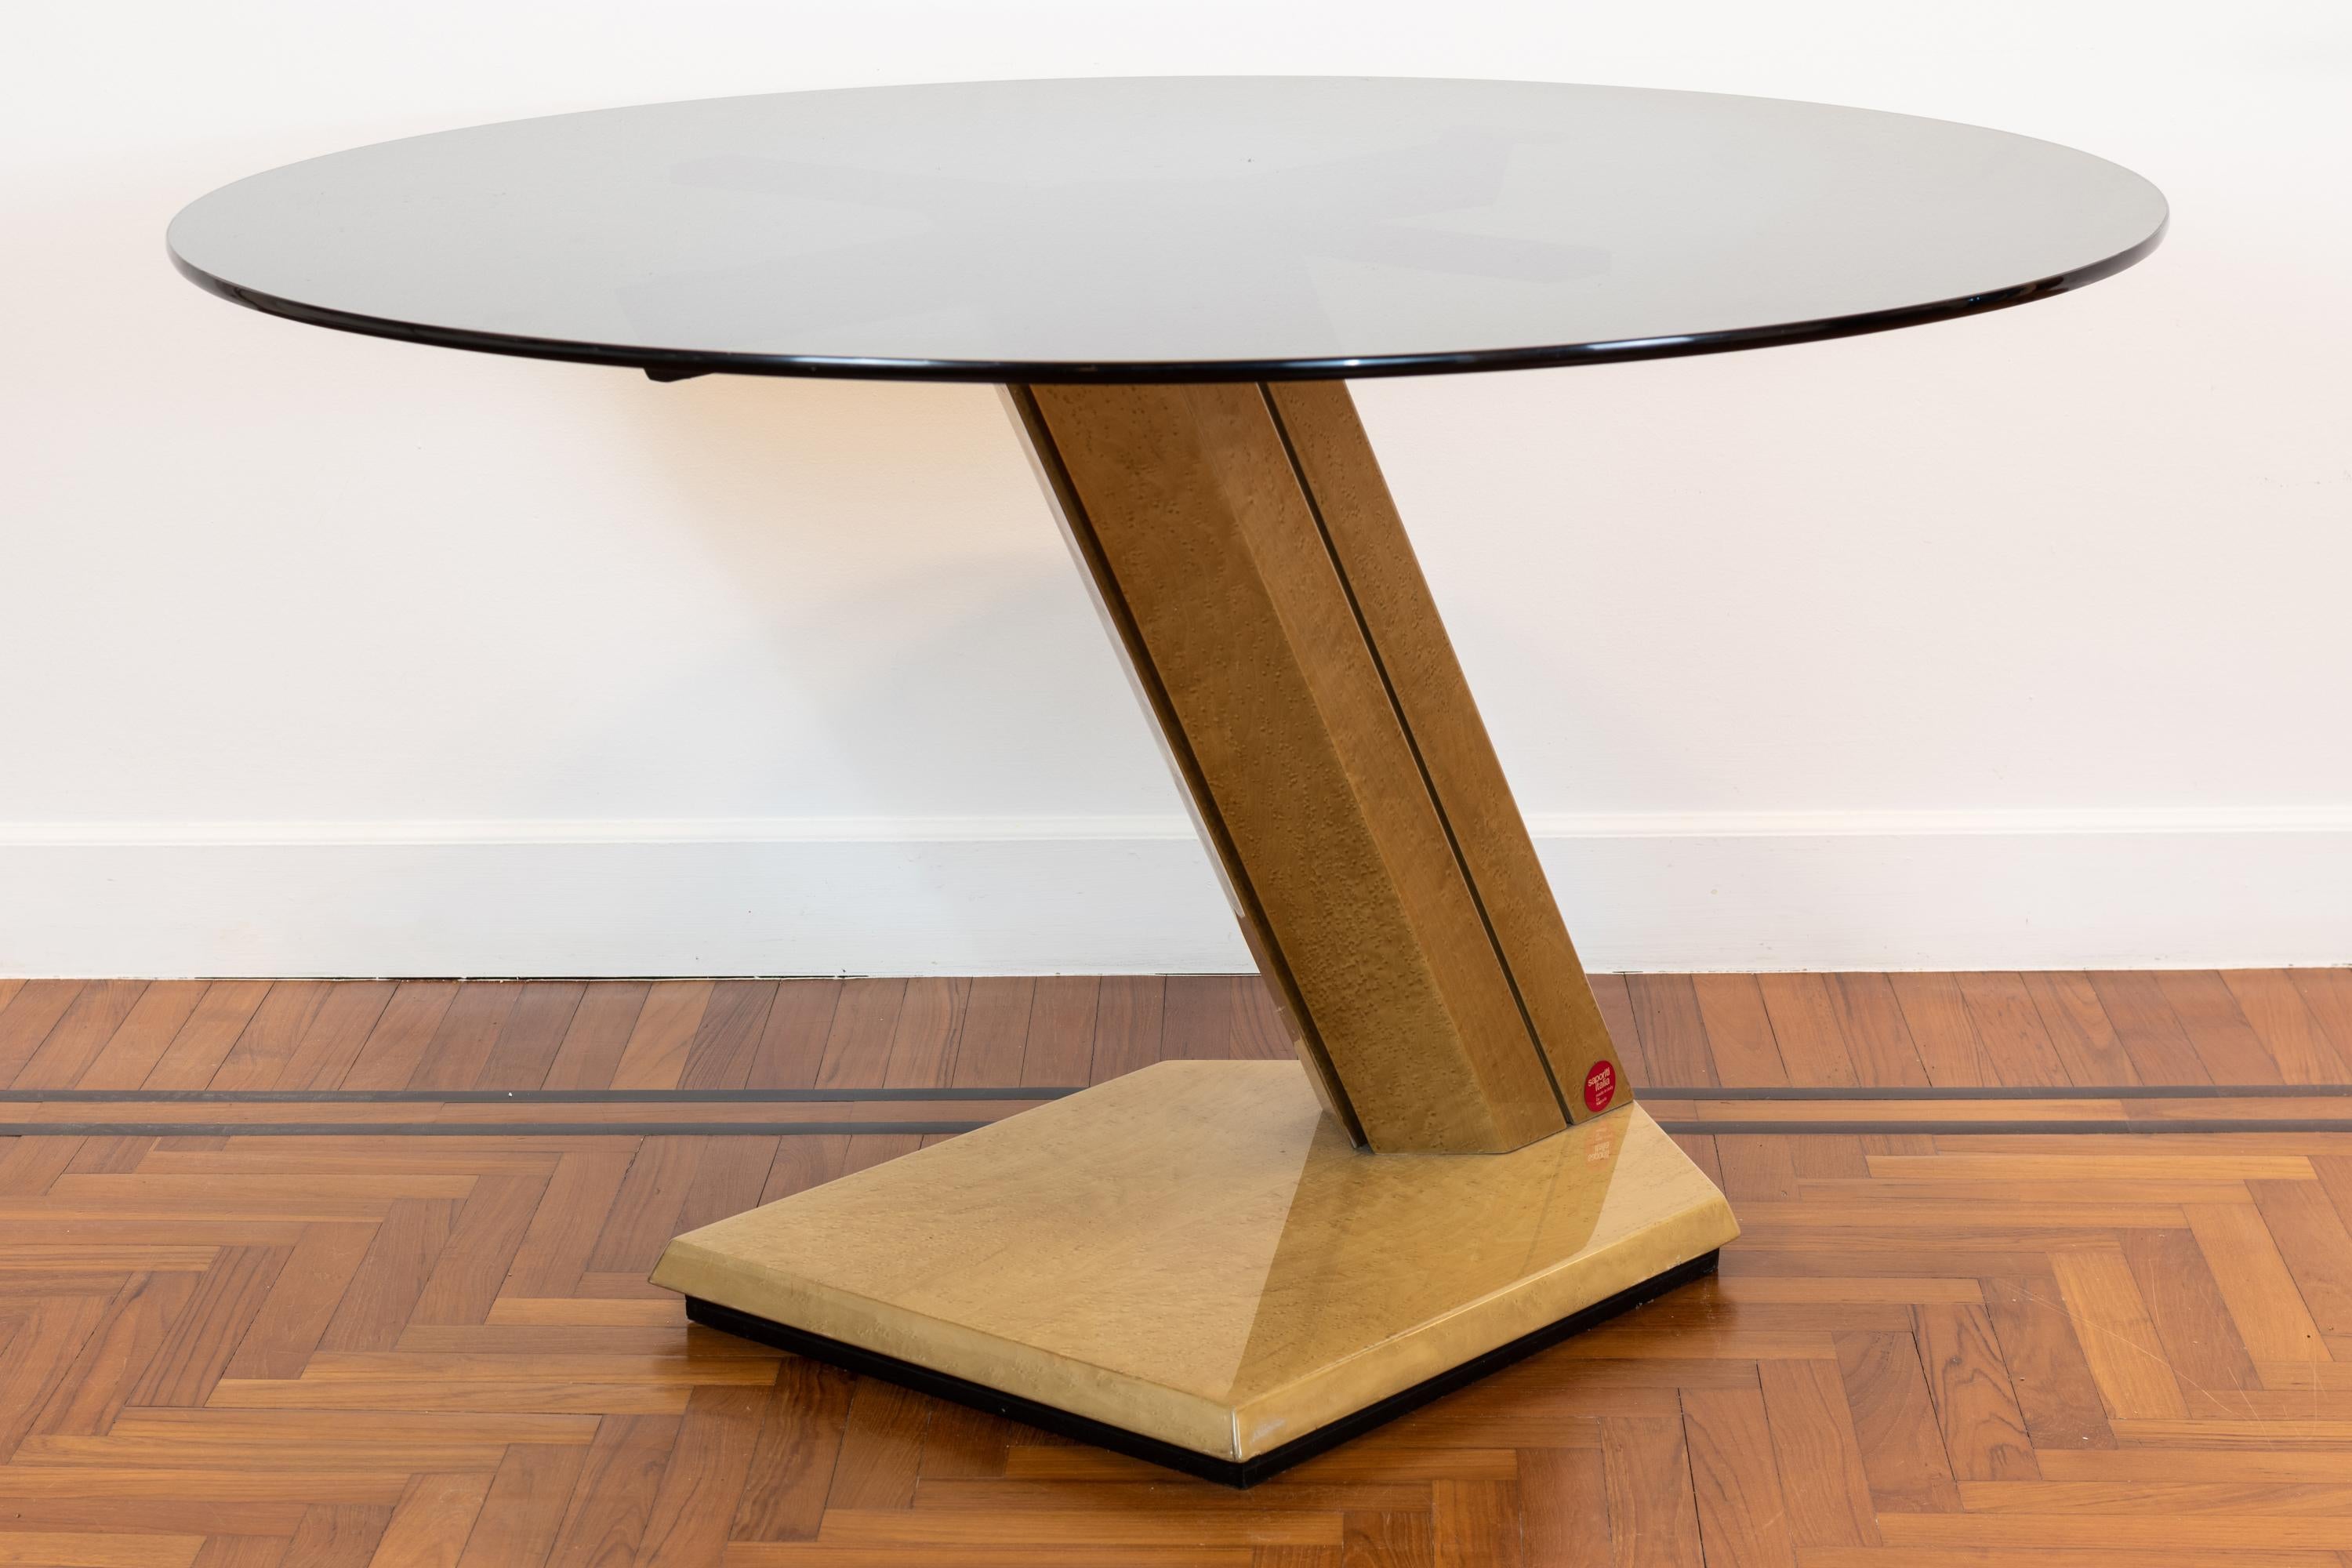 Sunny pedestal table with a structure in wood and a round-shaped tabletop in smoked glass, designed by Giovanni Offredi and manufactured by Saporiti during the 1970s.

Giovanni Offredi was a prominent Italian furniture and product designer of the